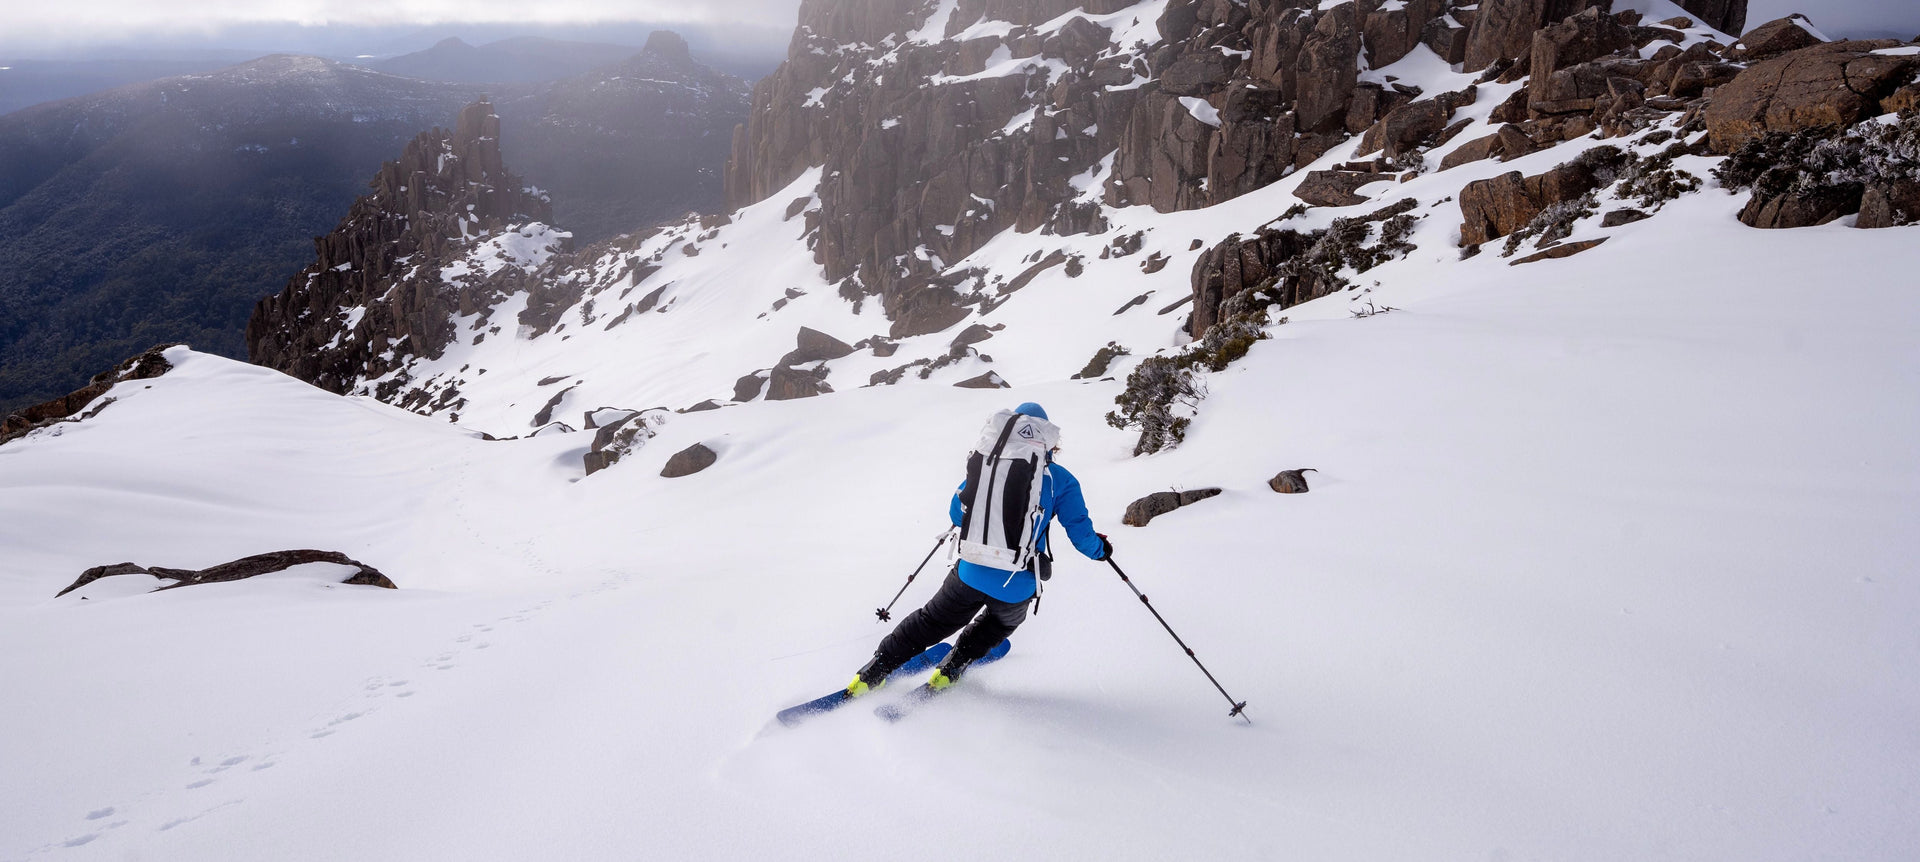 A person is skiing down a mountain.